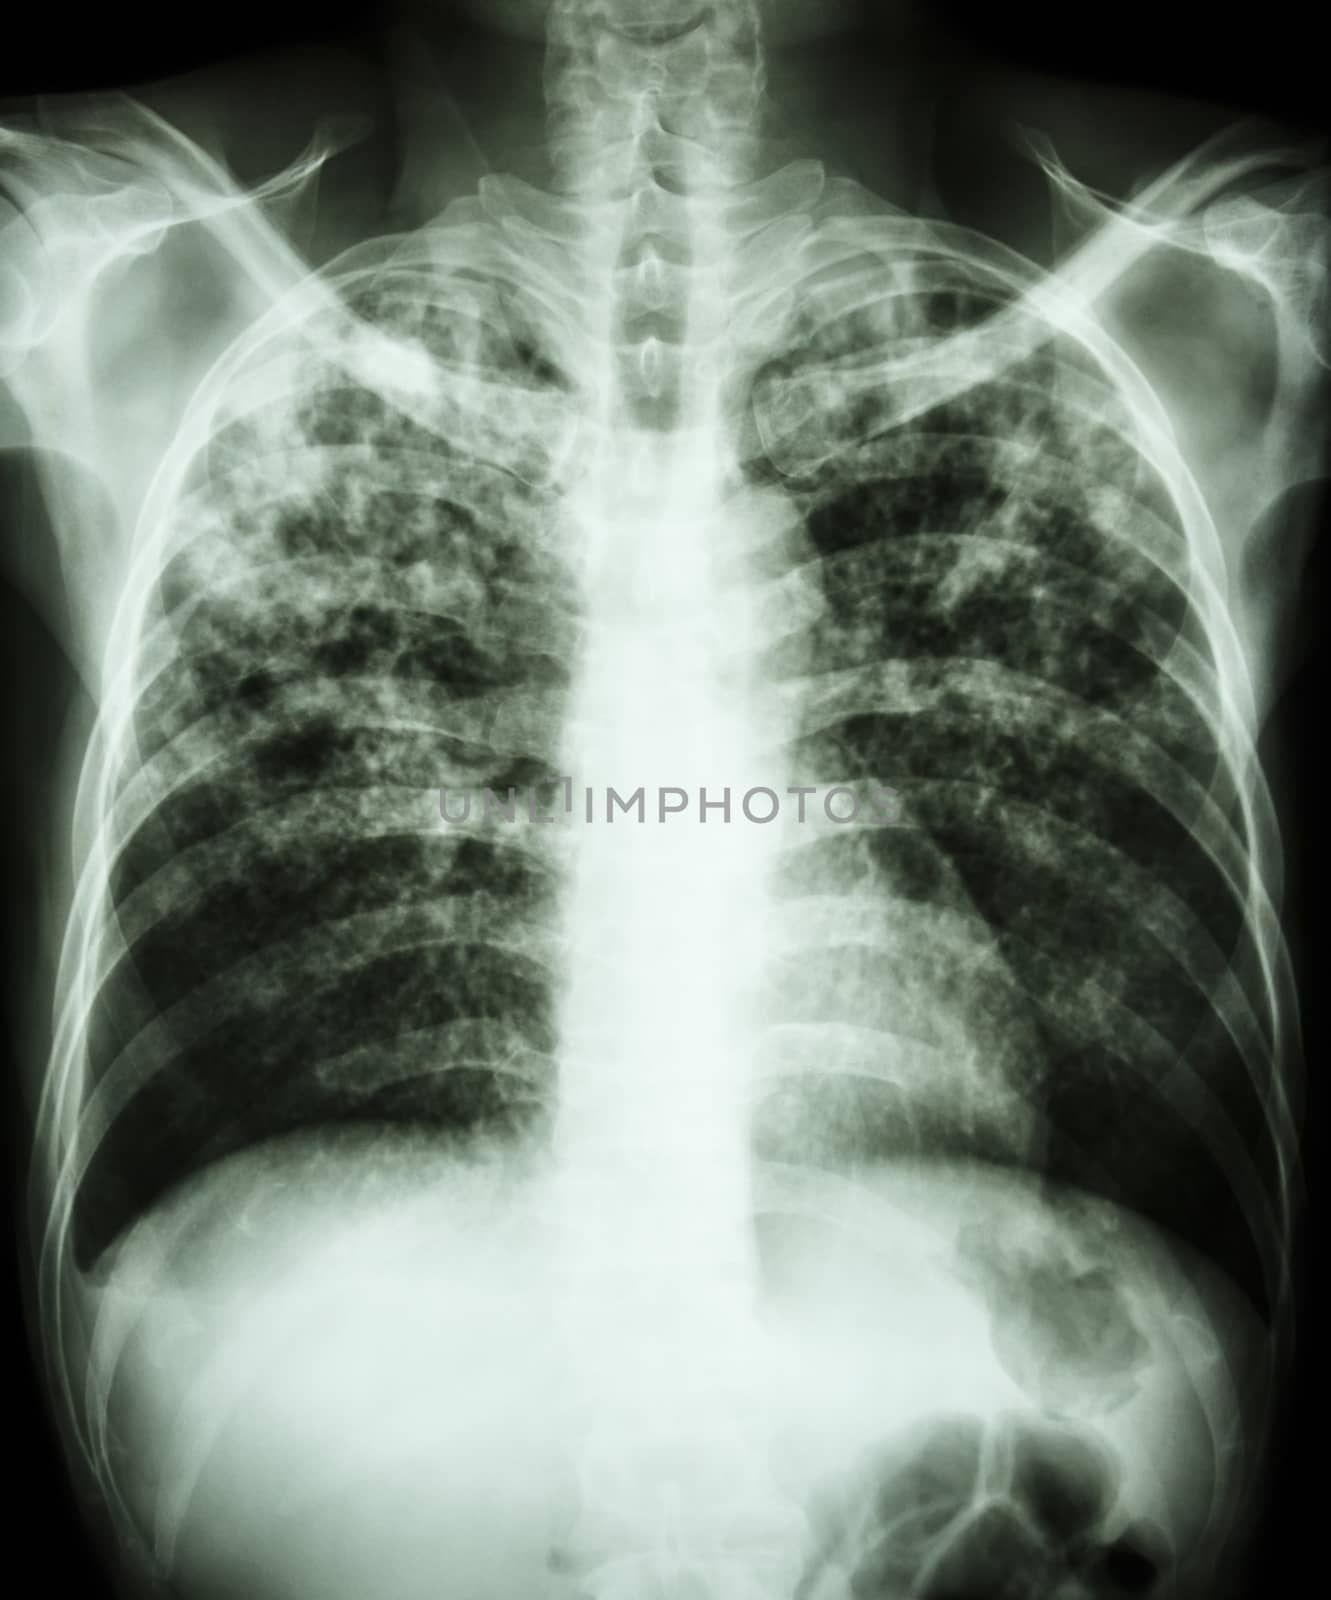 "Pulmonary tuberculosis" Film chest x-ray show interstitial infiltration both lung due to mycobacterium tuberculosis infection